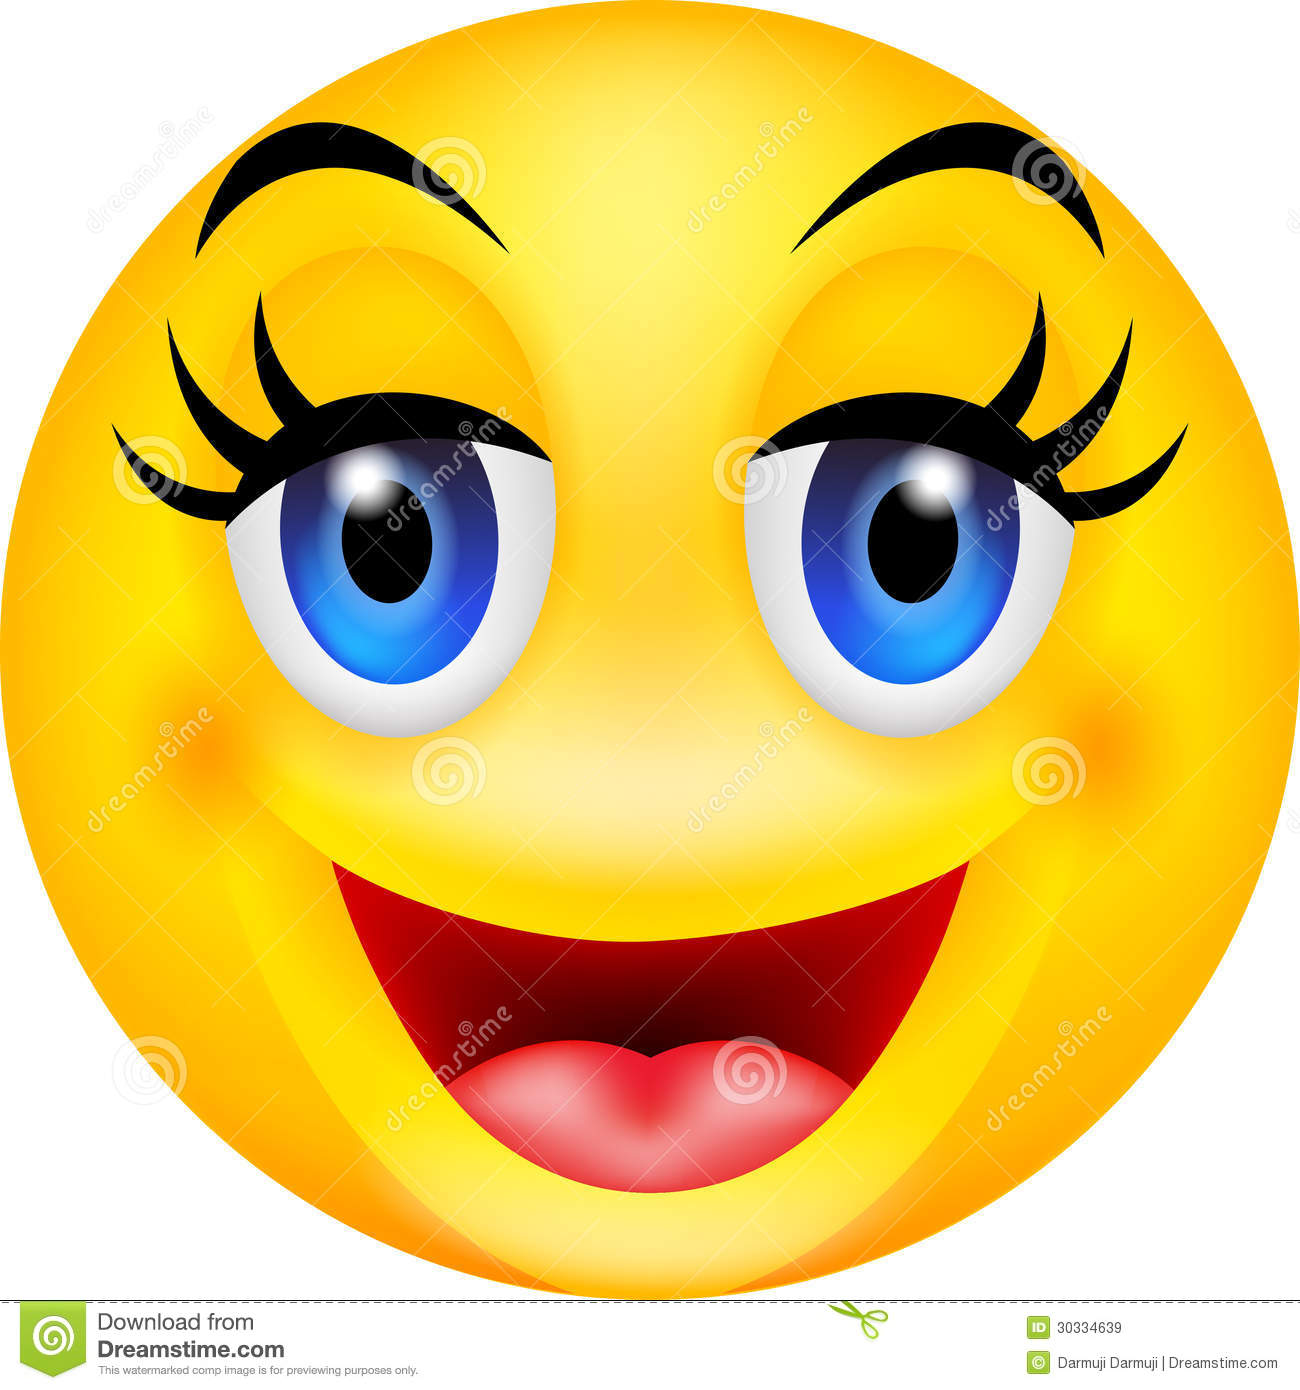 Funny Smile Emoticon Royalty Free Stock Images   Image  30334639